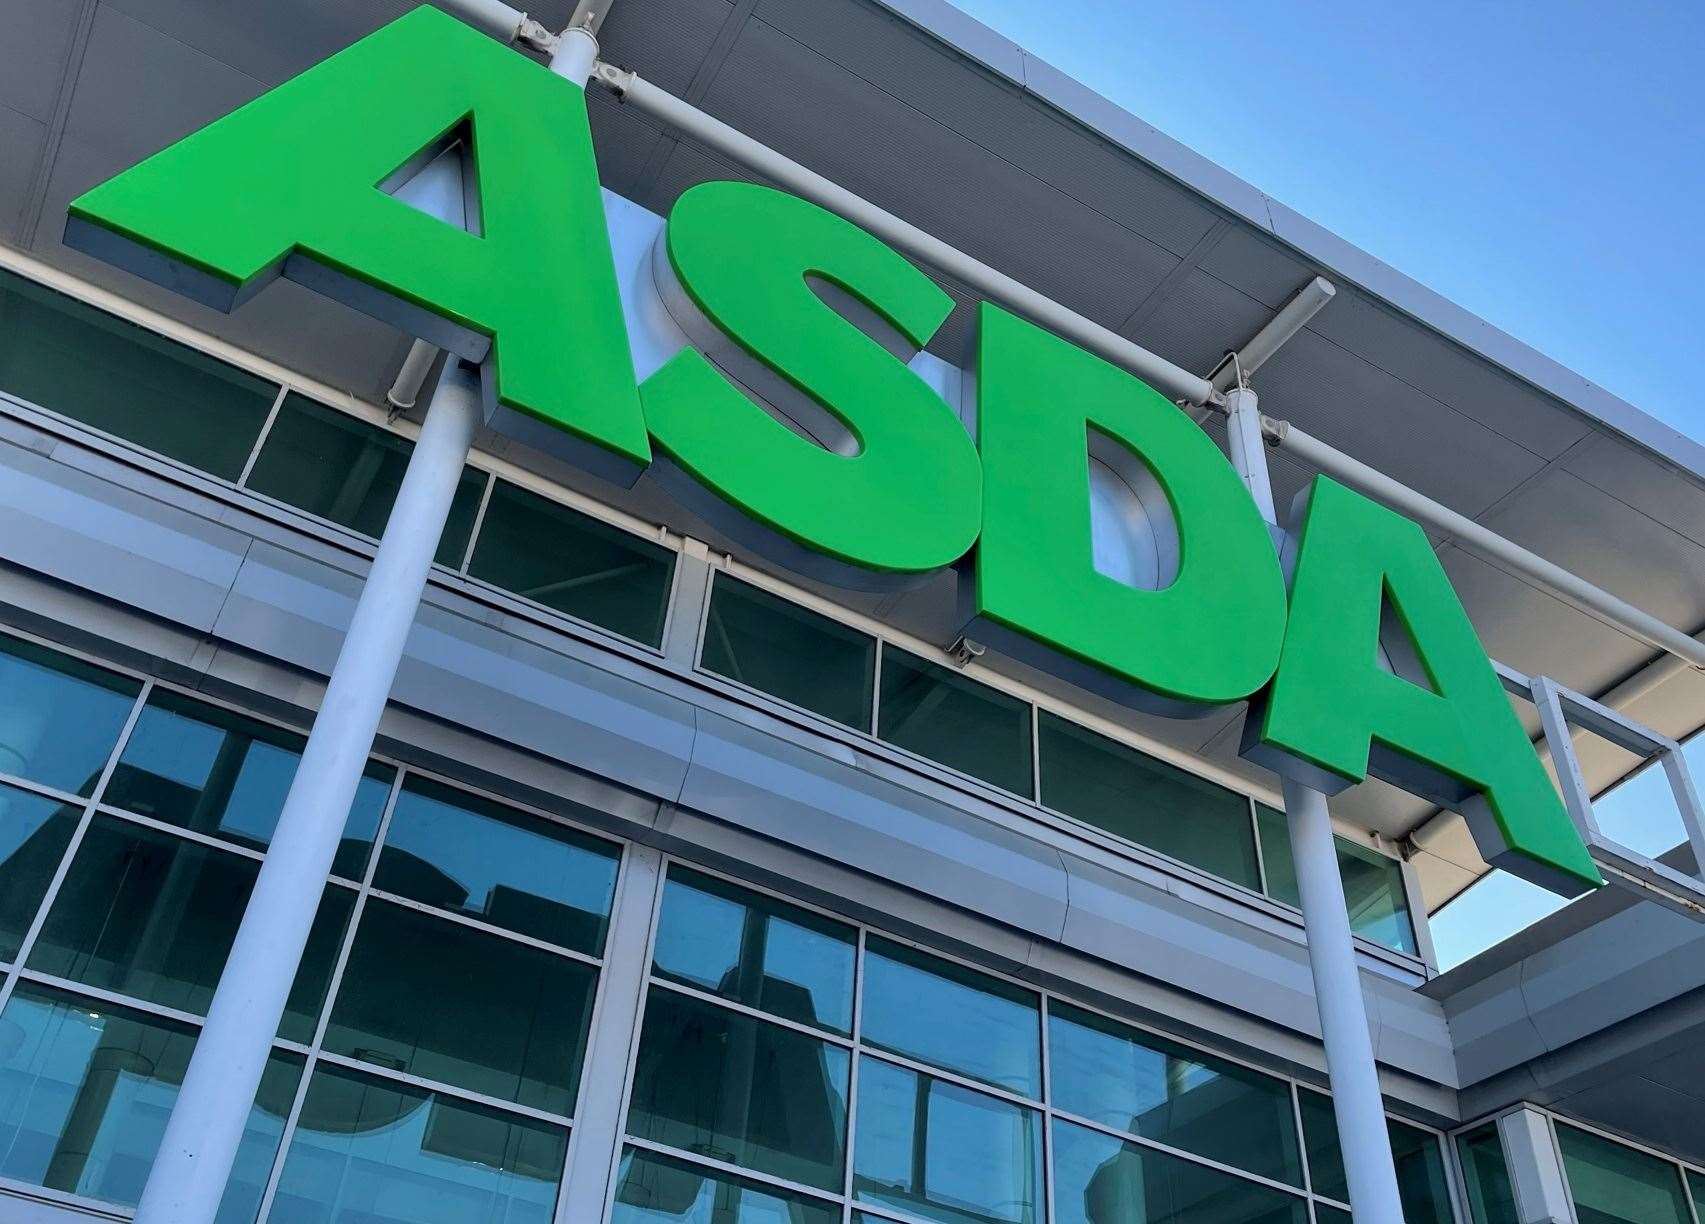 Asda customers can build up a ‘cashpot’ if they are Reward scheme members